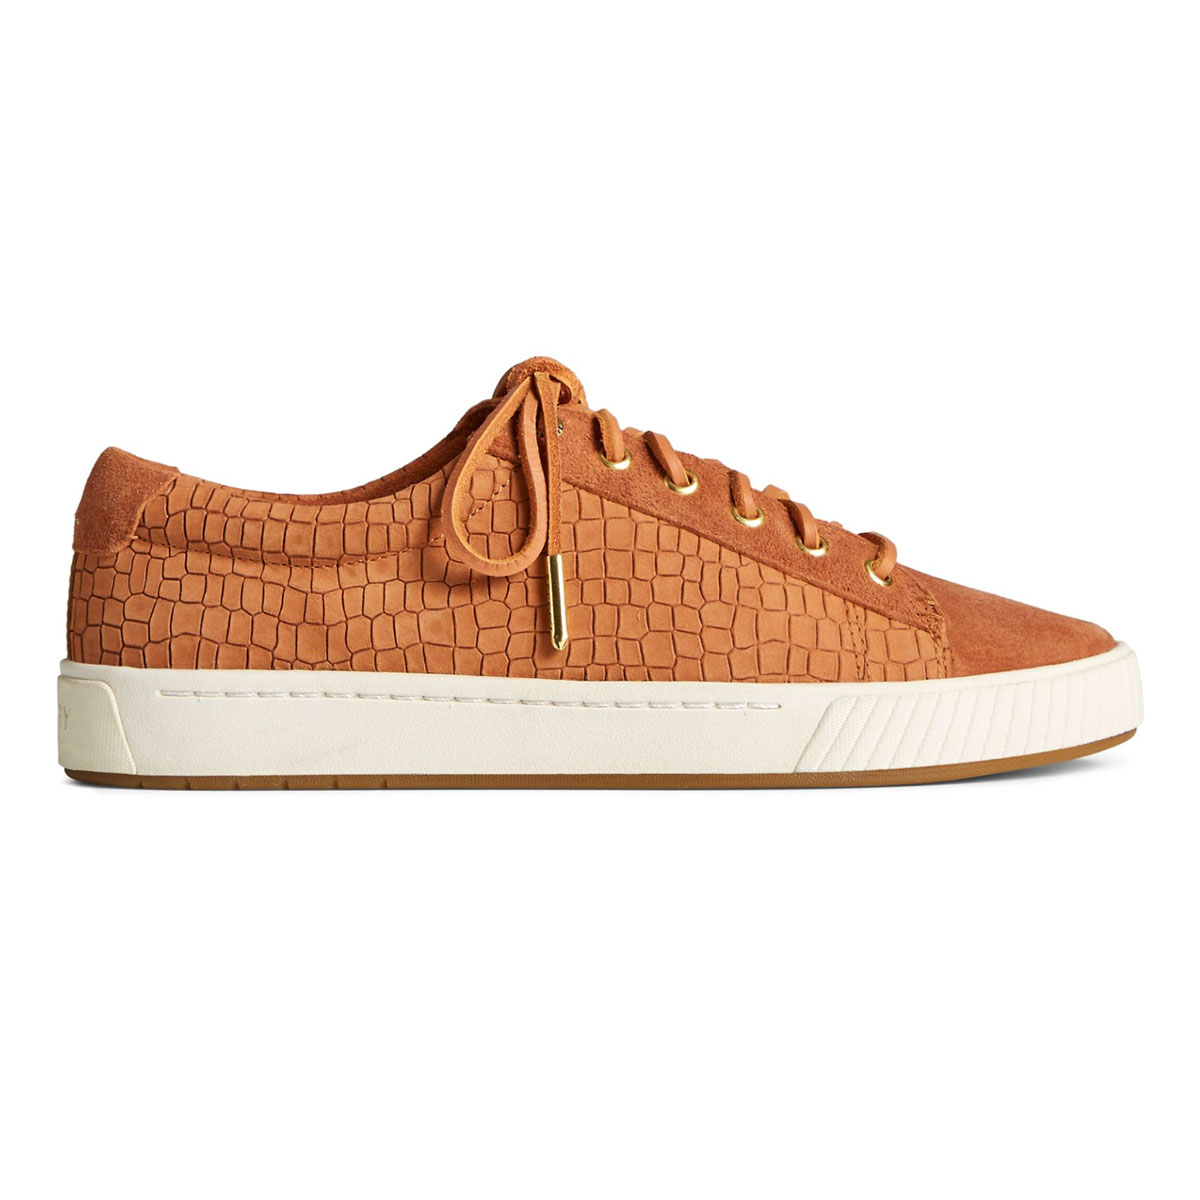 Sperry Women's Anchor Plushwave Tan Croc Nubuck Leather Sneakers ...